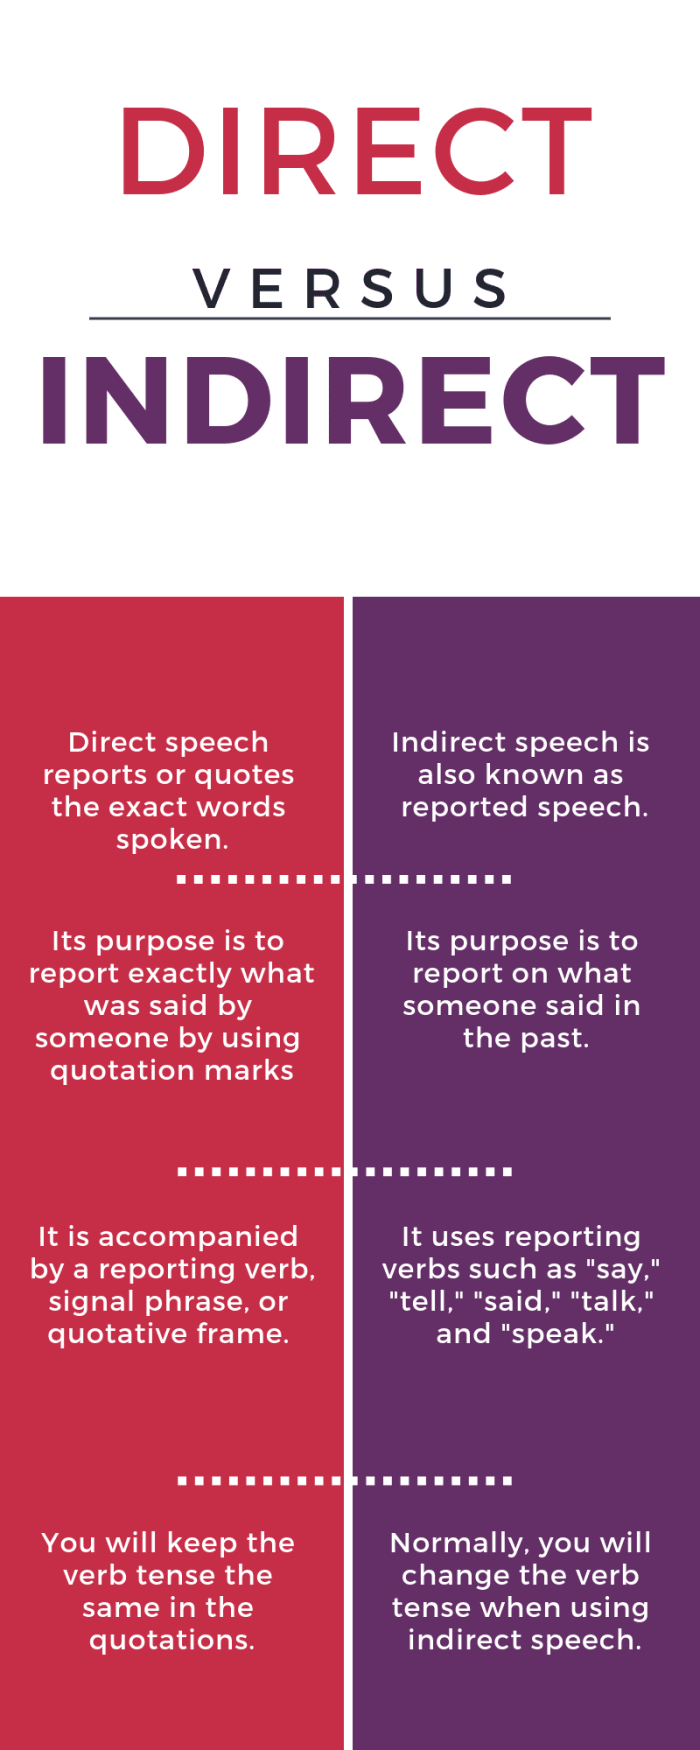 write a short note on direct and indirect speech